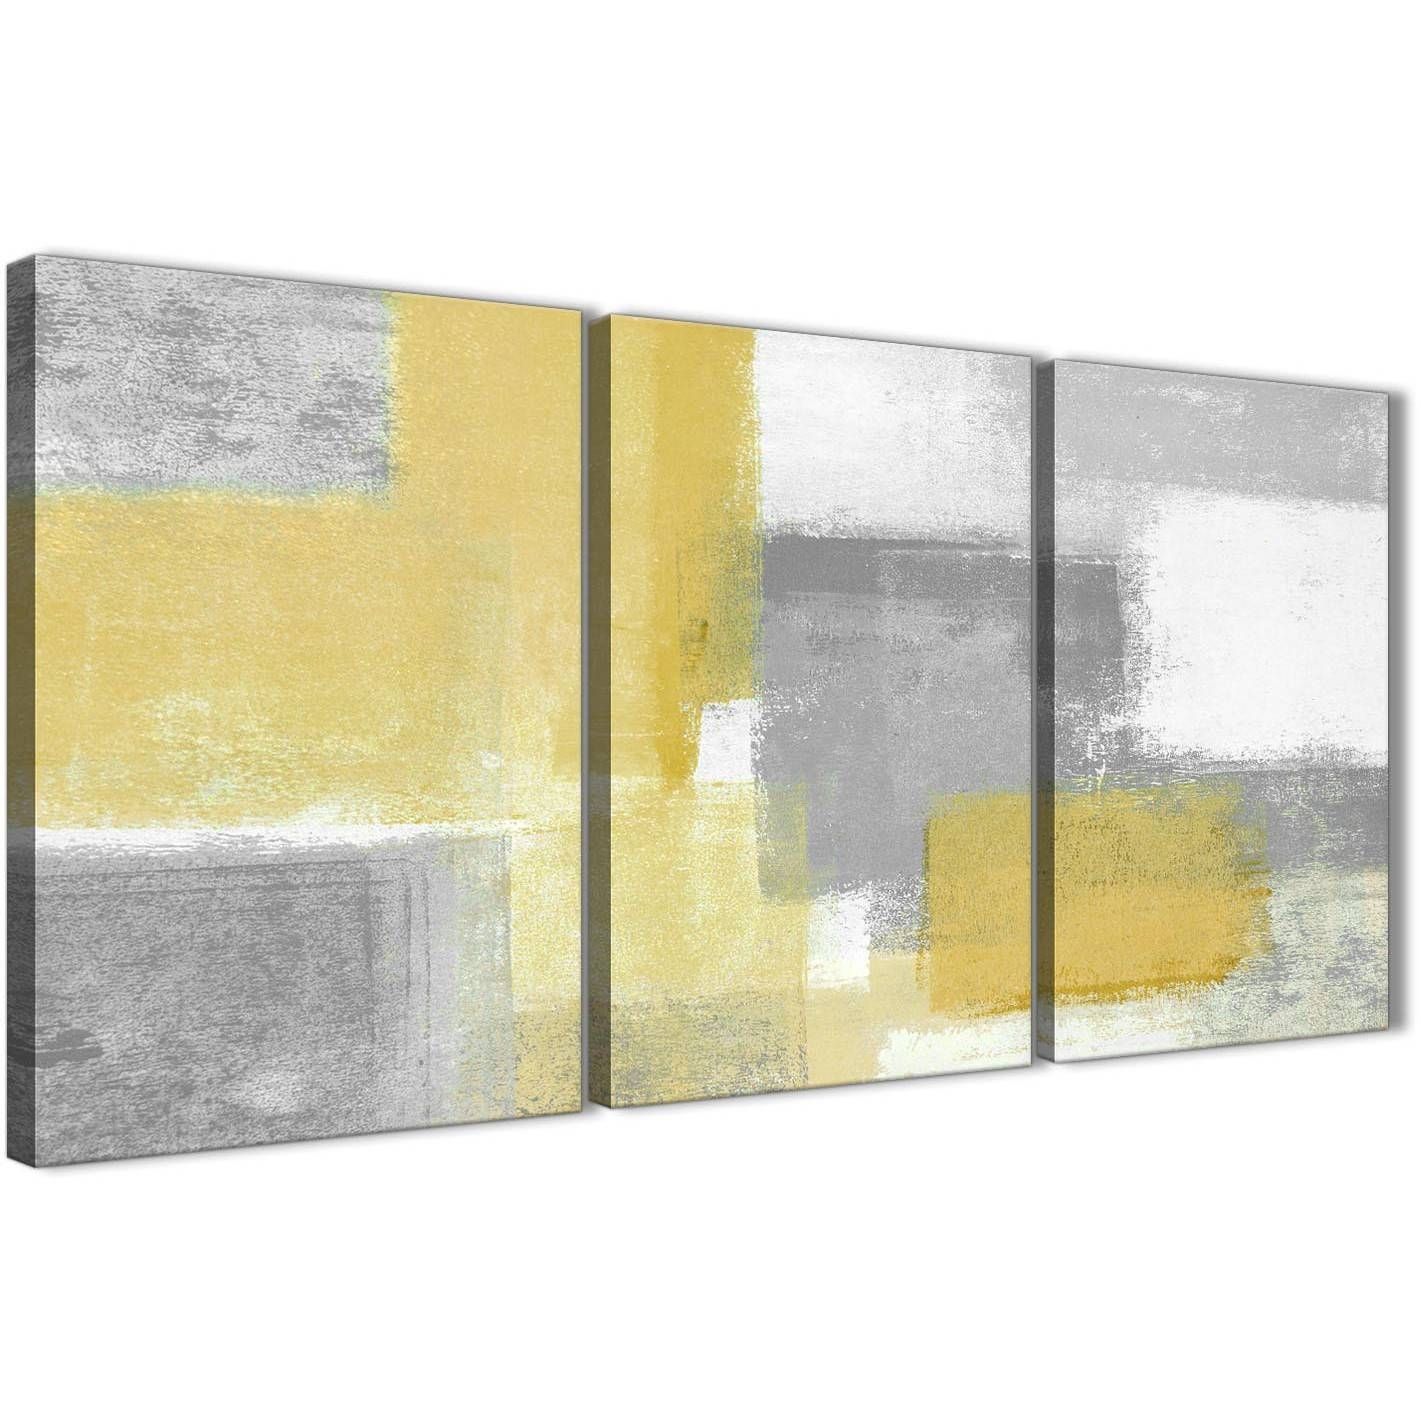 3 Panel Mustard Yellow Grey Kitchen Canvas Wall Art Decor Pertaining To Latest Yellow And Grey Wall Art (View 17 of 25)